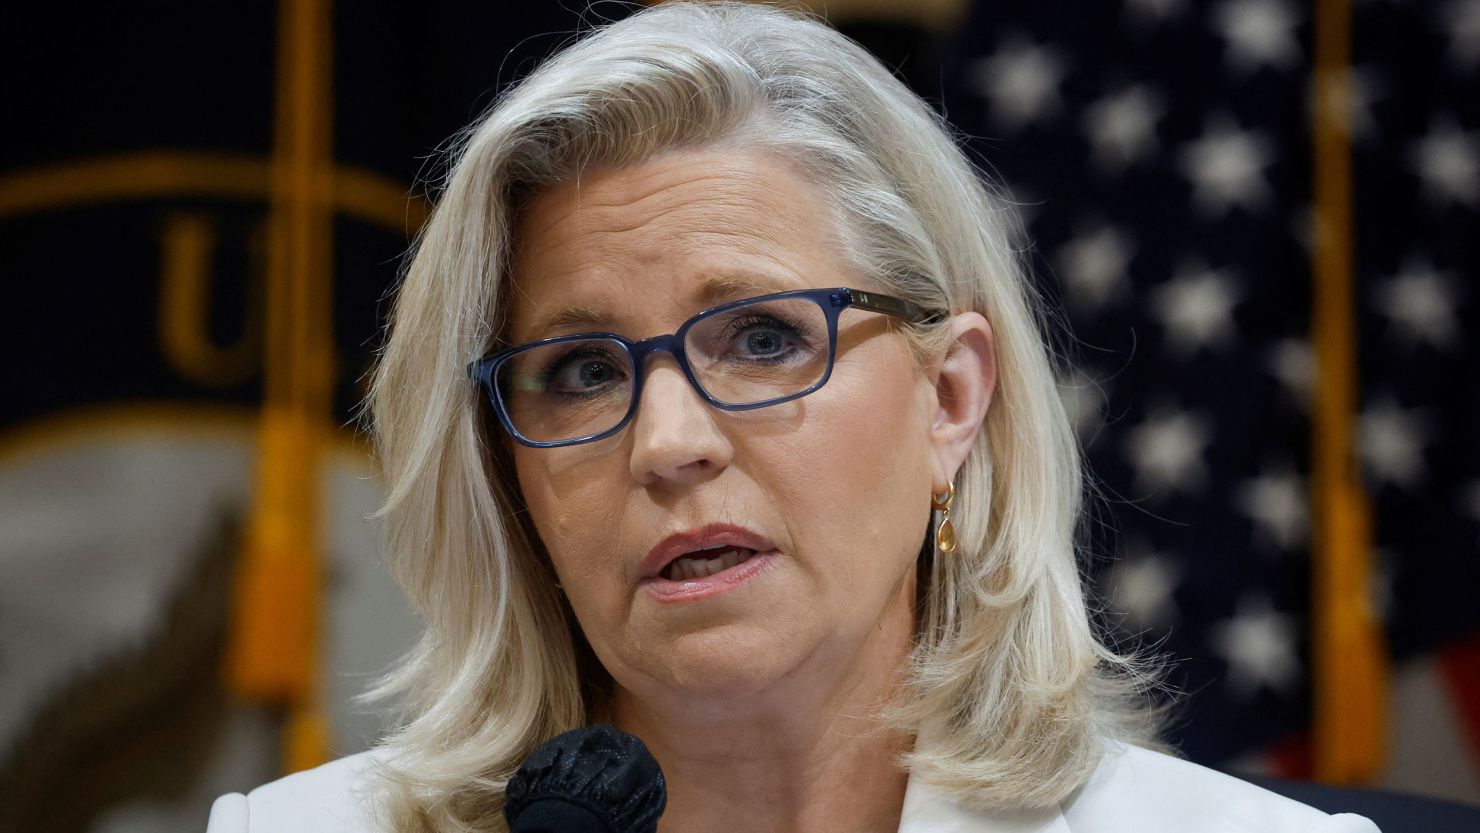 Rep. Liz Cheney (R-WY) speaks during a public hearing of the House select committee investigating the January 6, 2021, attack on the US Capitol.